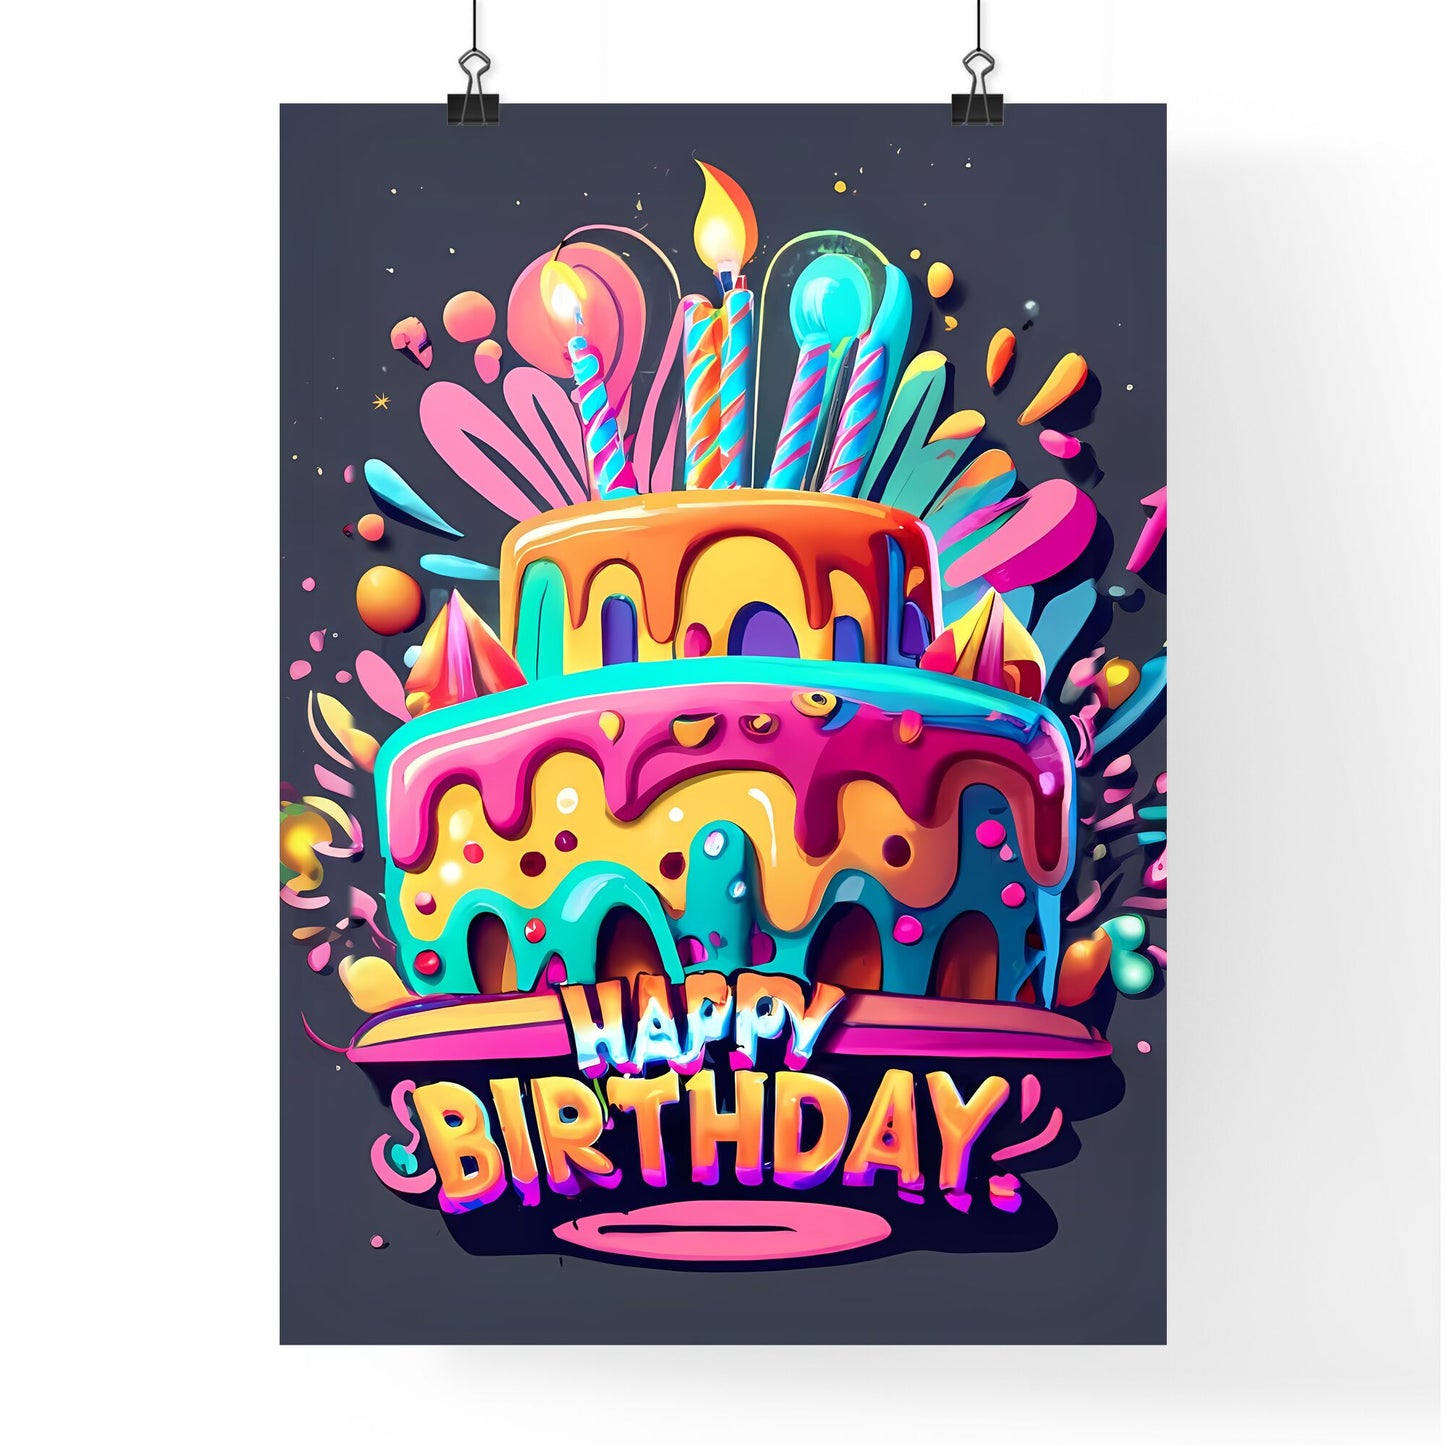 Happy Birthday - A Colorful Cake With Candles Art Print Default Title